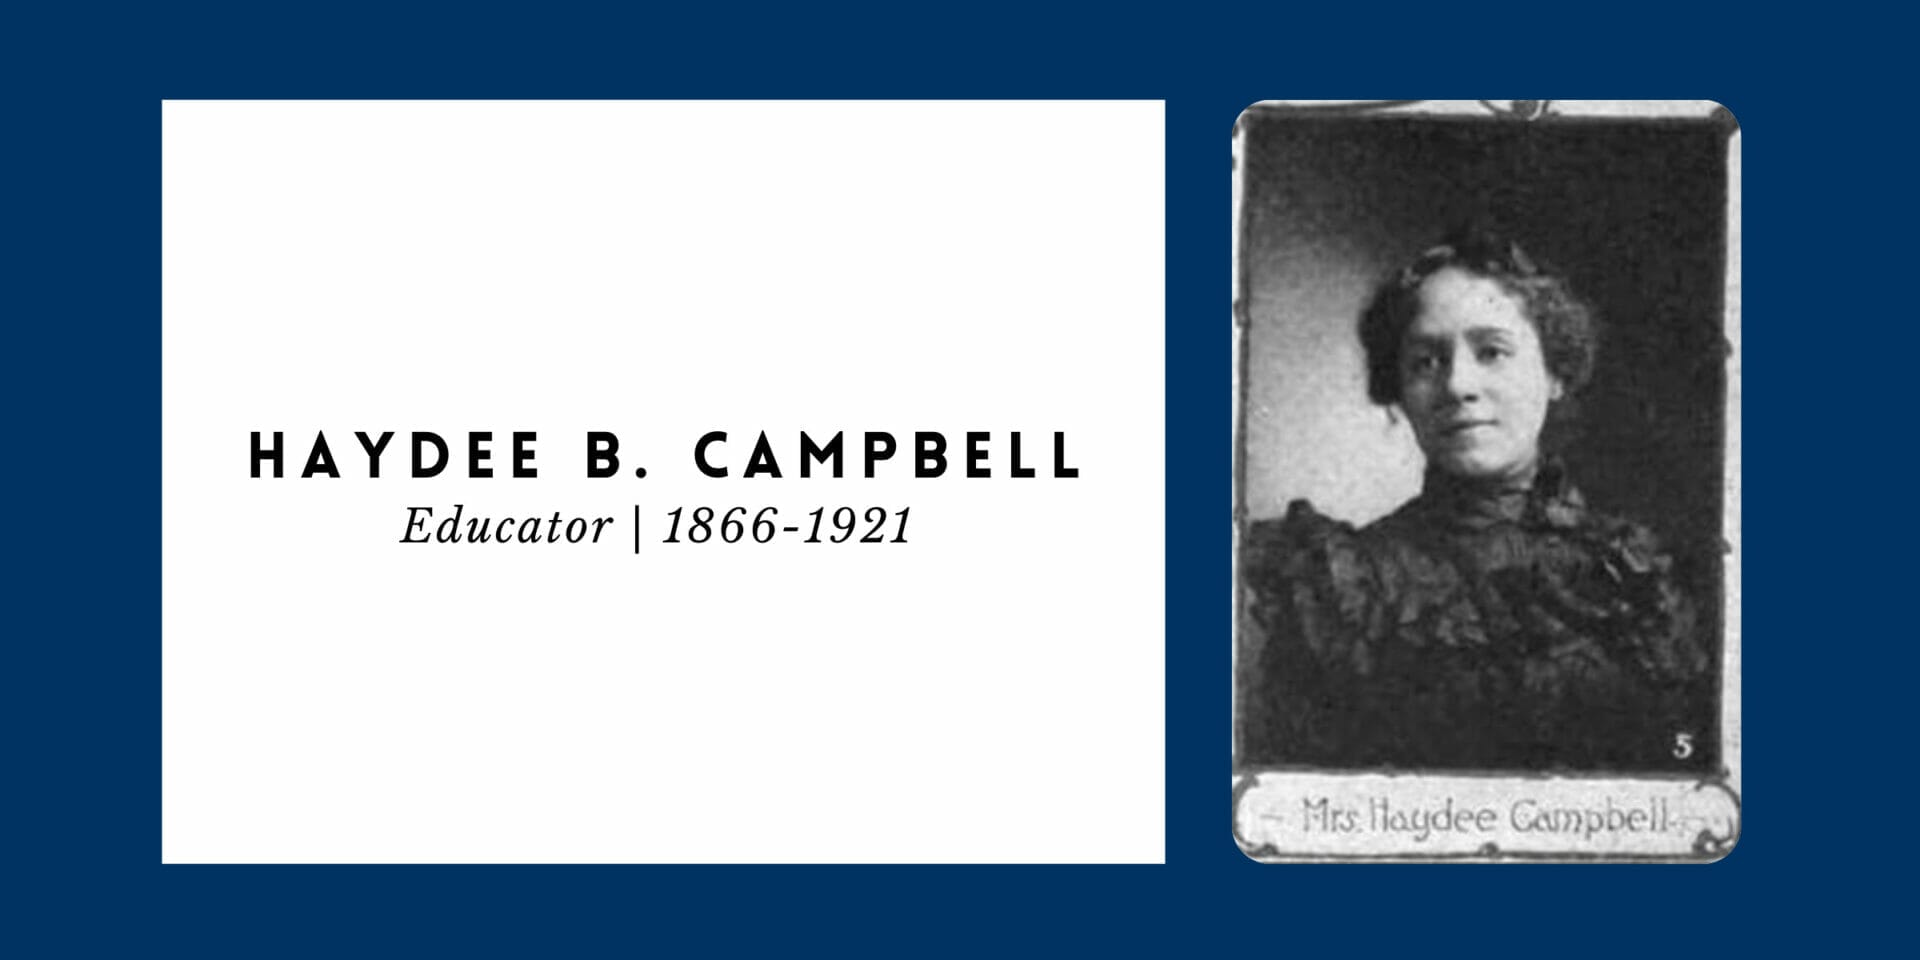 A black women in Victorian-style fashion. Haydee B. Campbell, Educator, 1866 - 1921